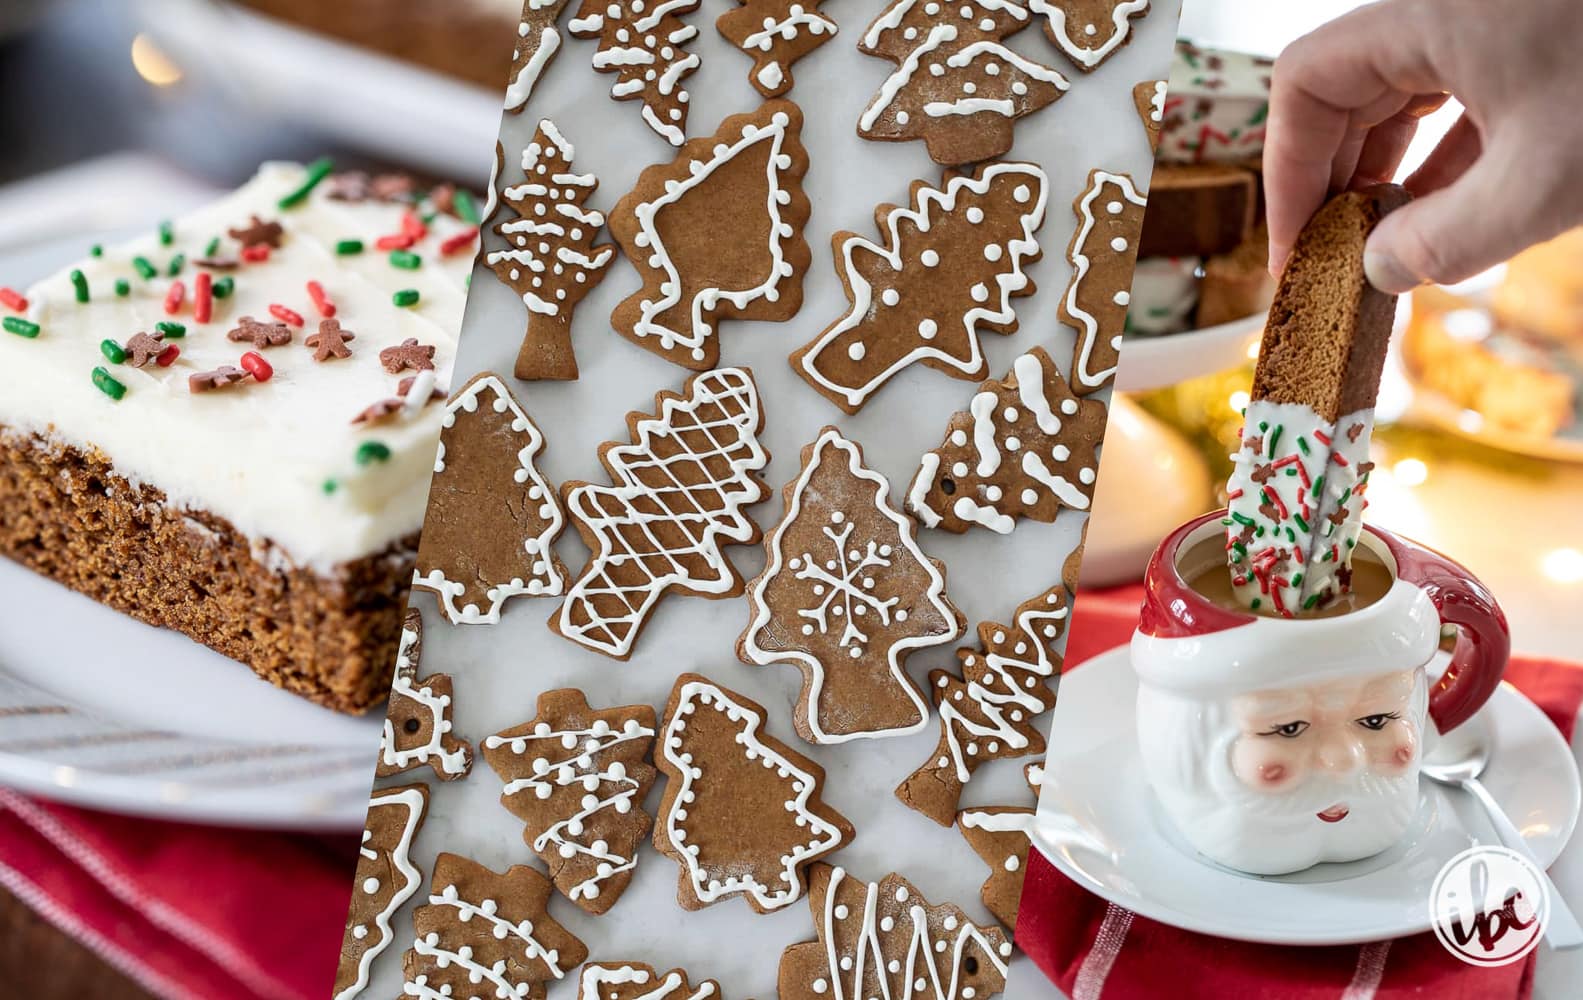 Gingerbread Recipes to Spice Up This Holiday Season #gingerbread #recipe #christmas #holiday #dessert #recipes #cookies #desserts